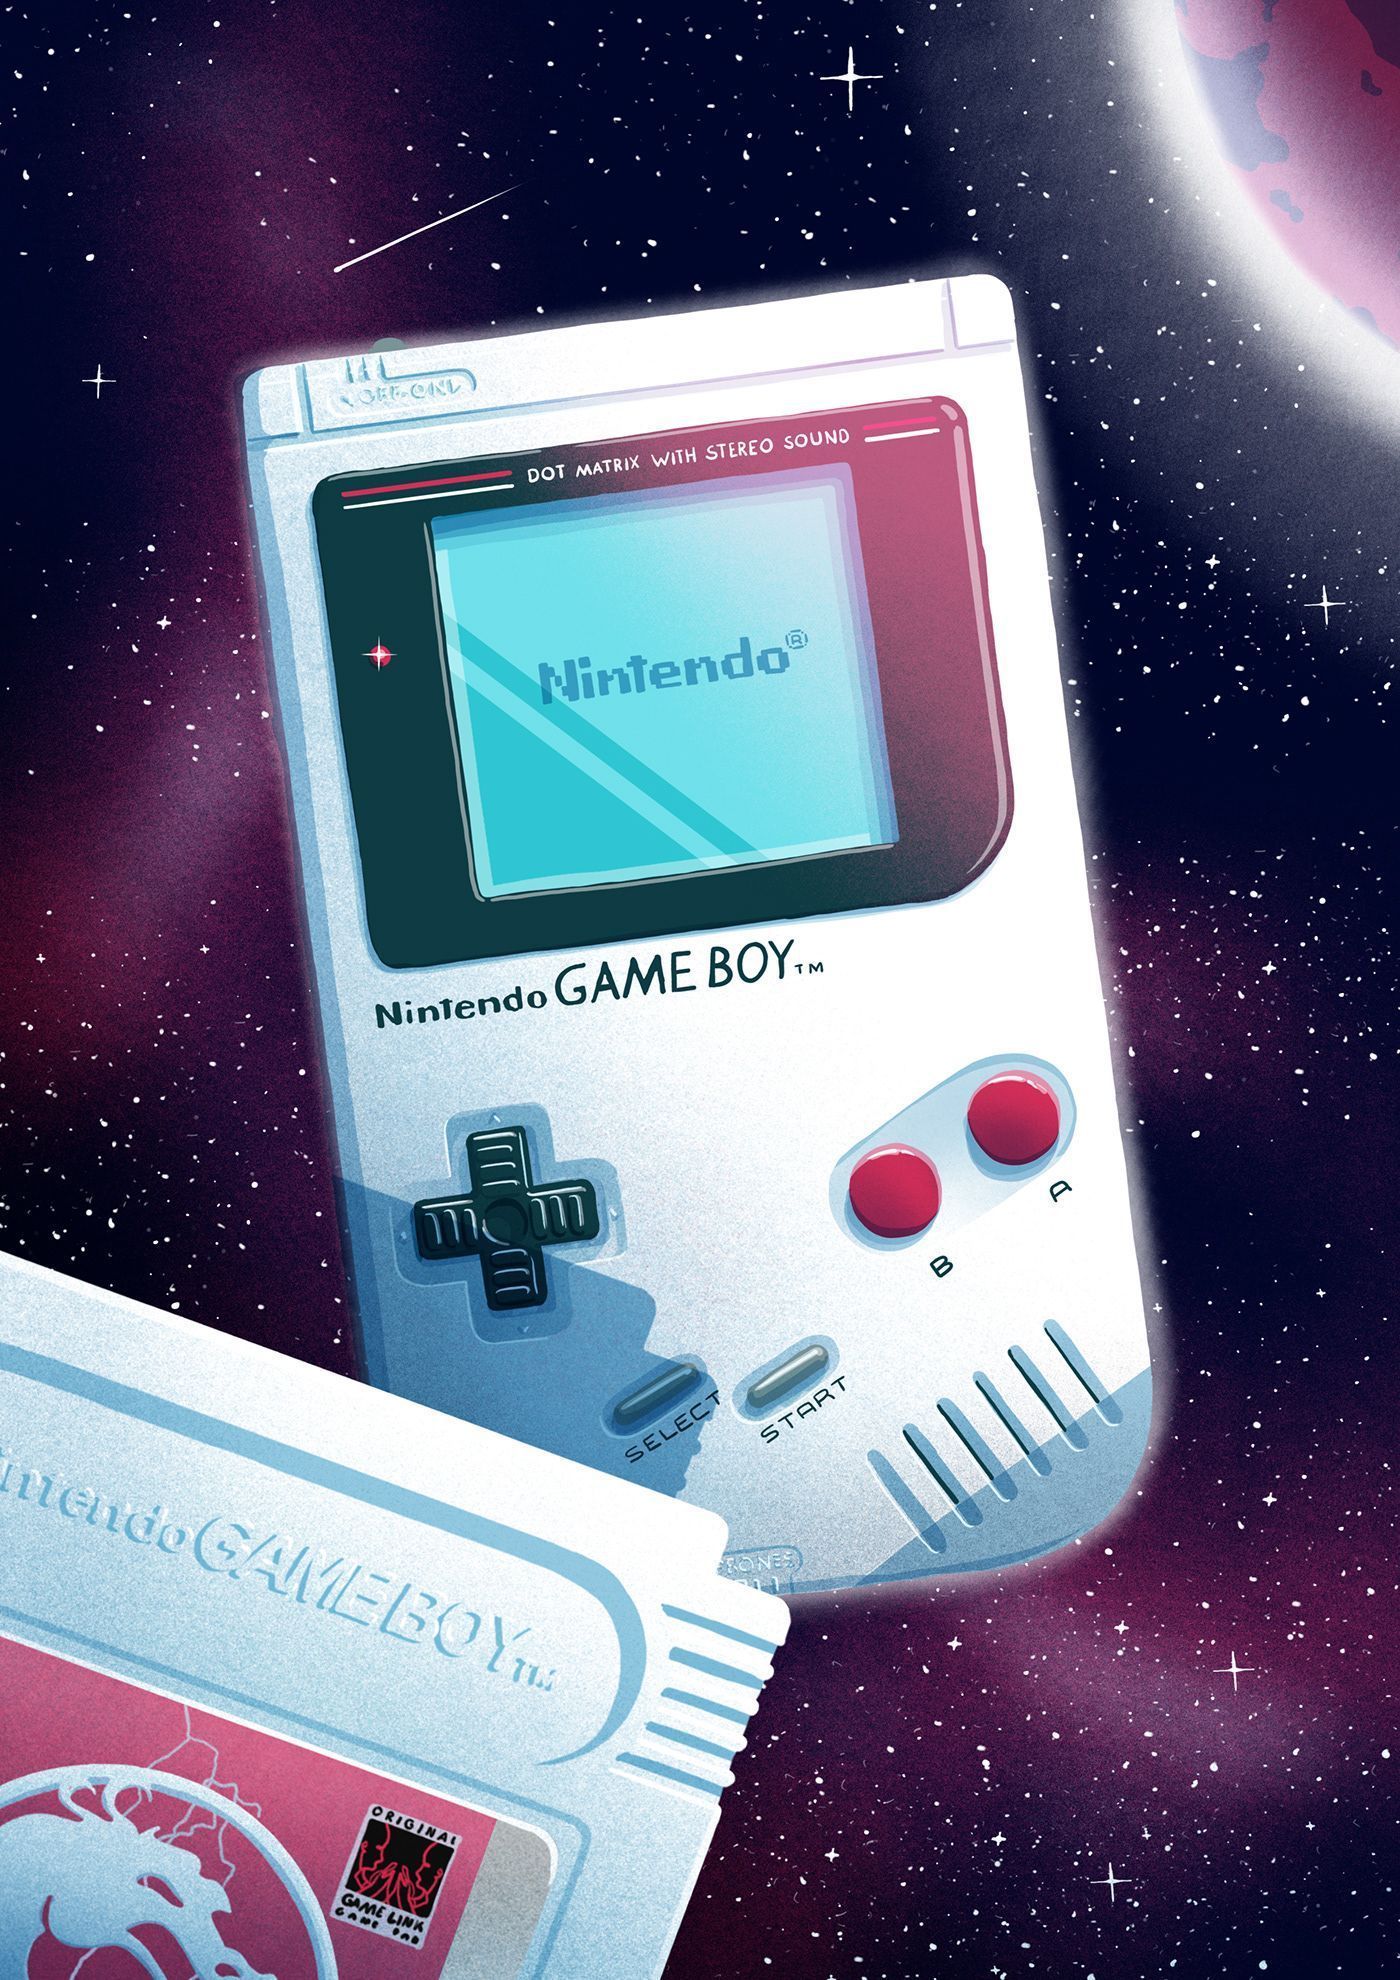 A Nintendo Gameboy in space with a red planet in the background - Nintendo, Game Boy